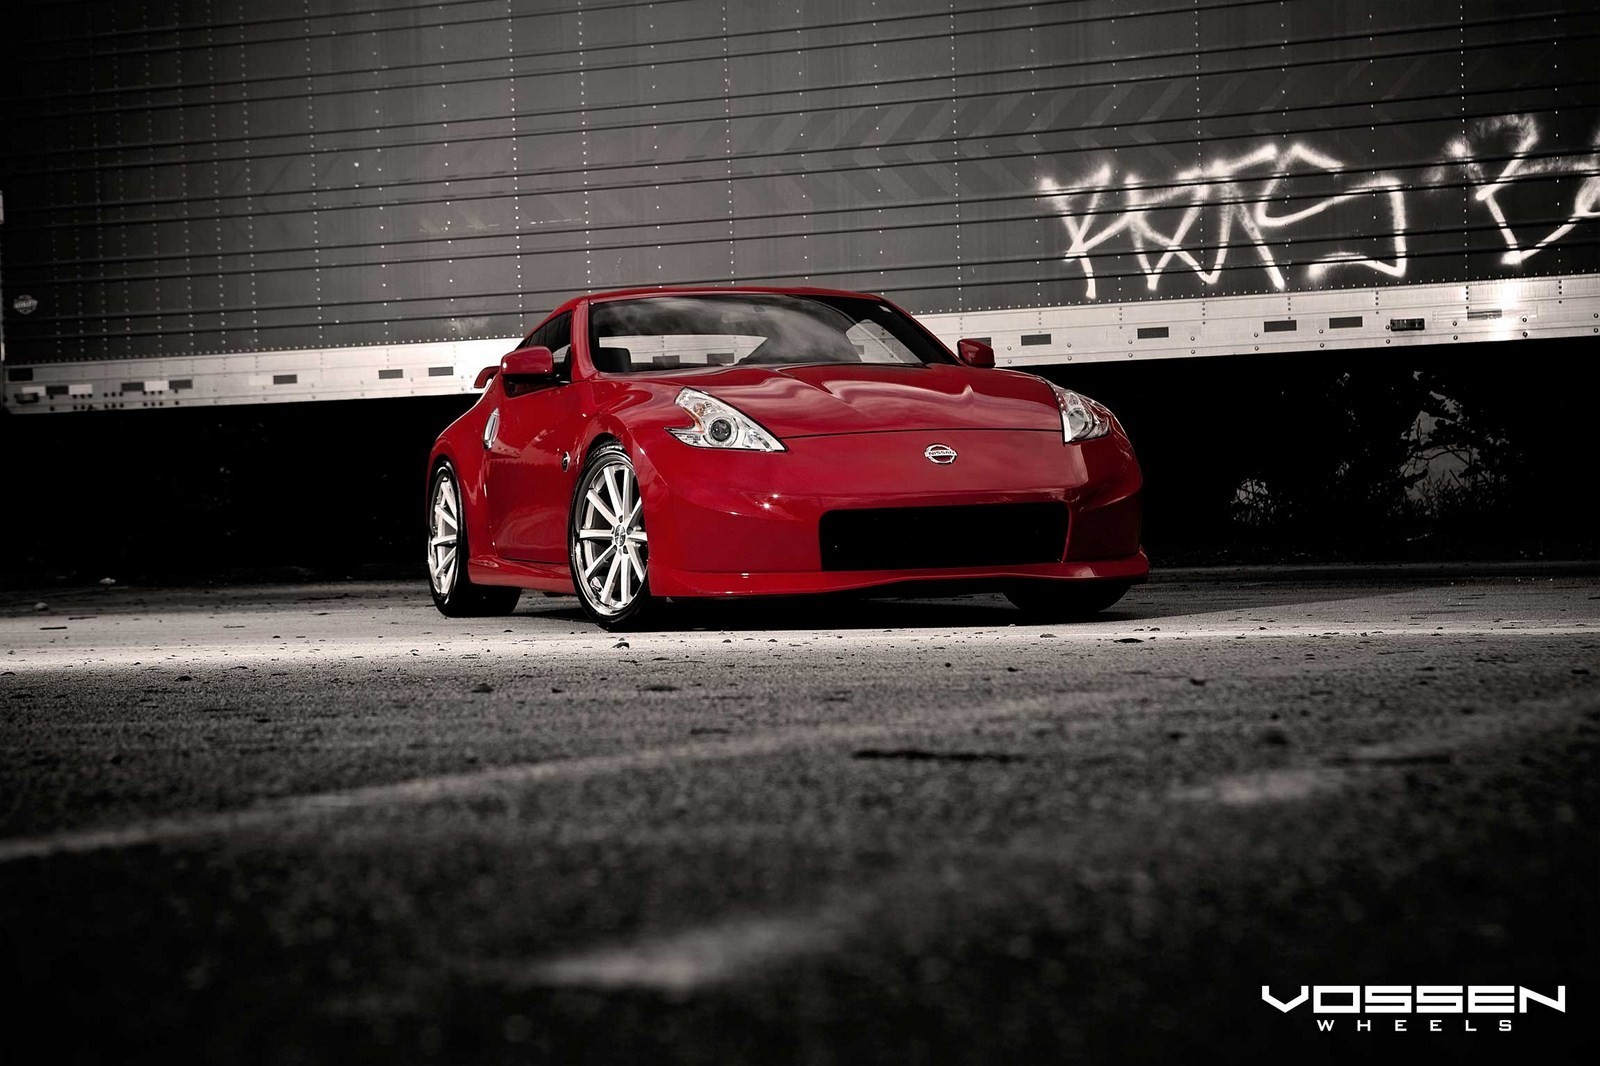 General 1600x1066 car Nissan Nissan 370Z selective coloring red cars vehicle Nissan Fairlady Z